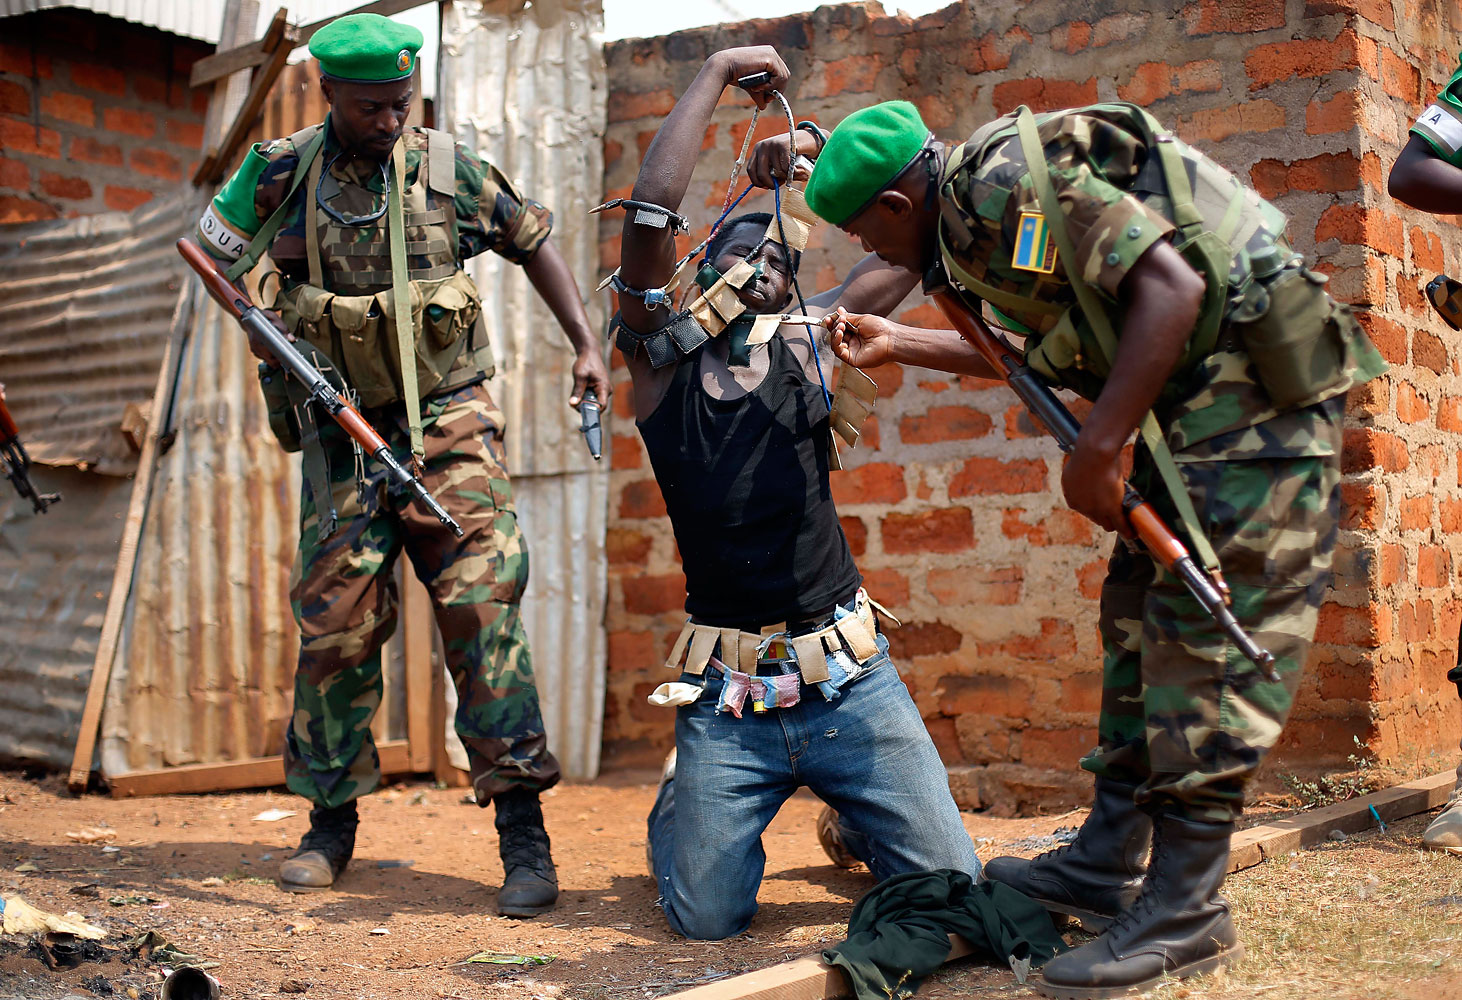 Rwandan African Union peacekeepers remove the lucky charms from a suspected Anti-Balaka Christian man who was found with a rifle and a grenade following looting in the Muslim market of the PK13 district of Bangui, Jan. 22, 2014.